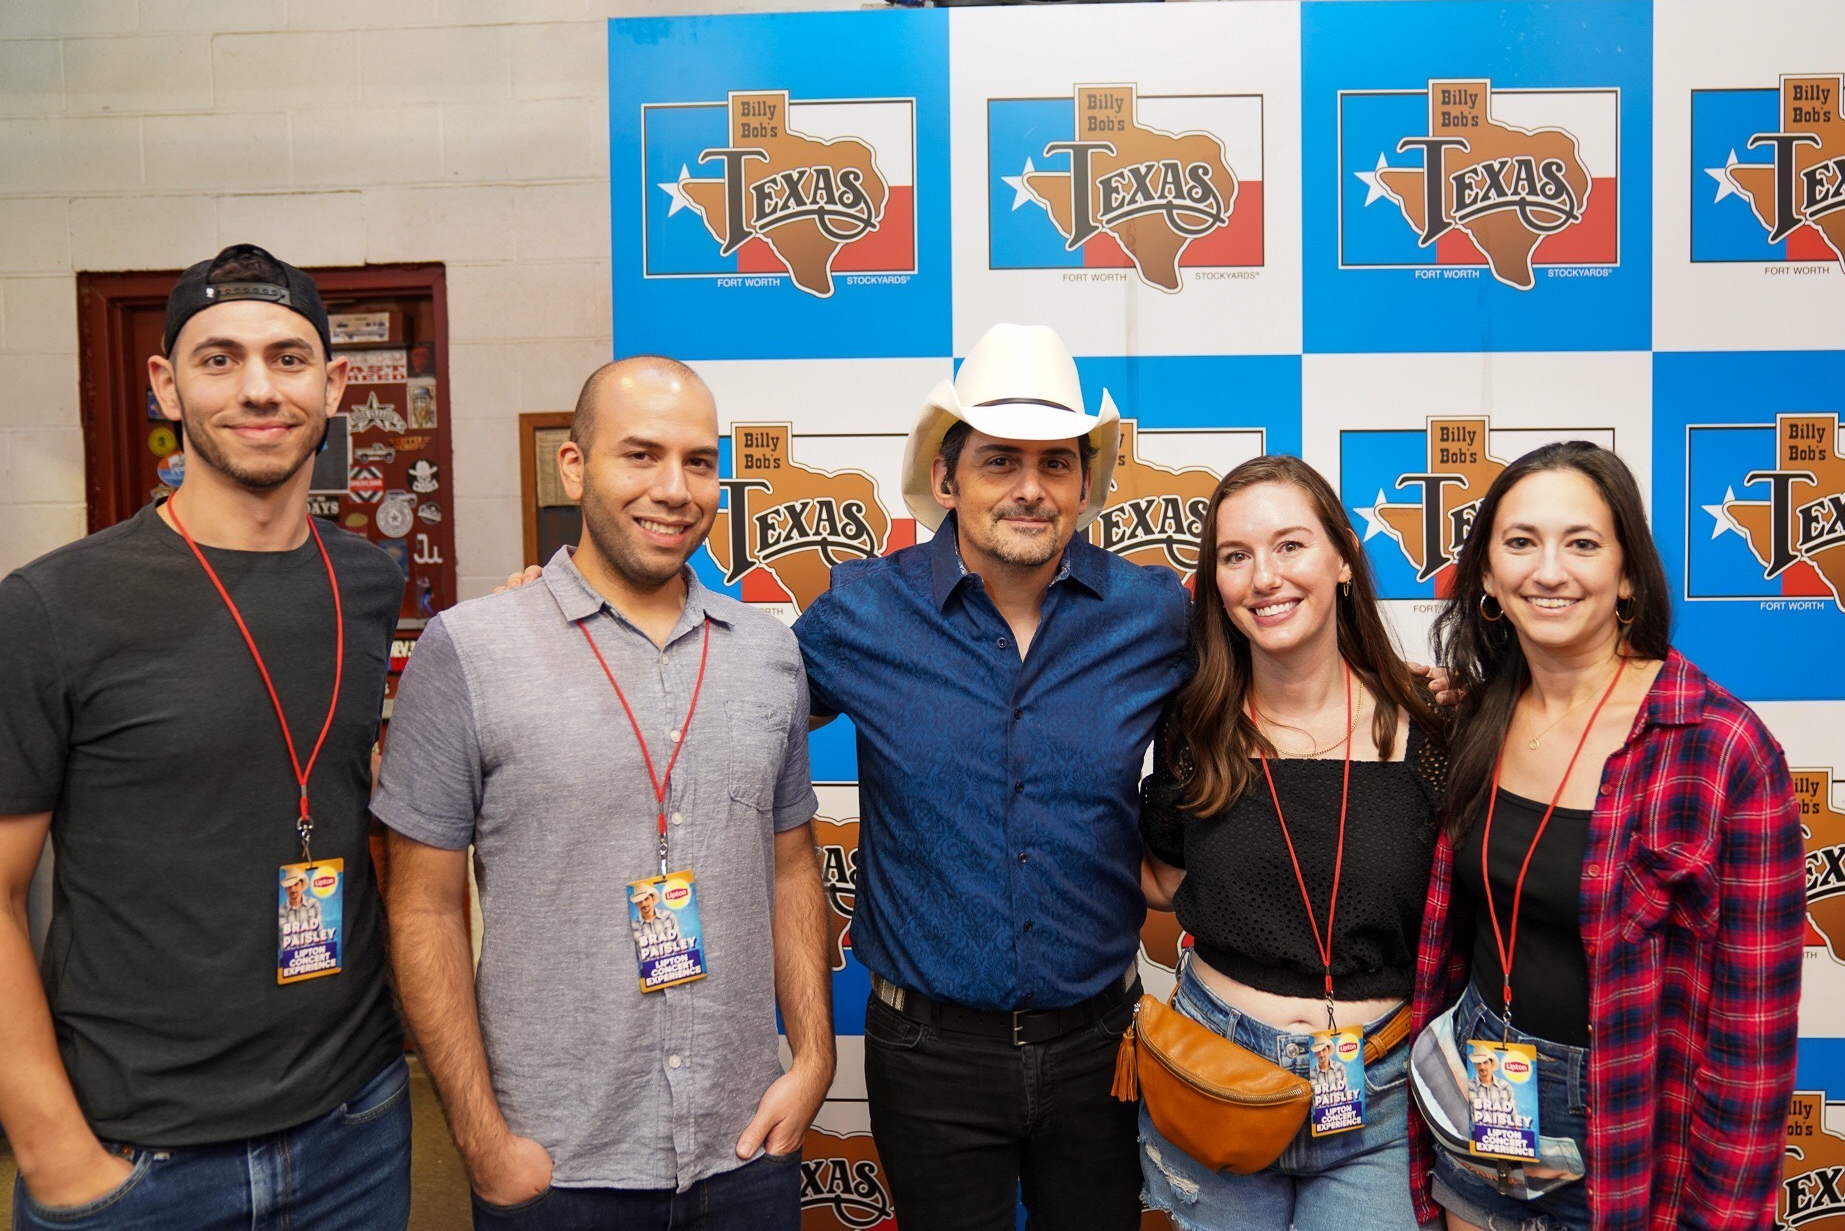 Alyssa and friends with Brad Paisley